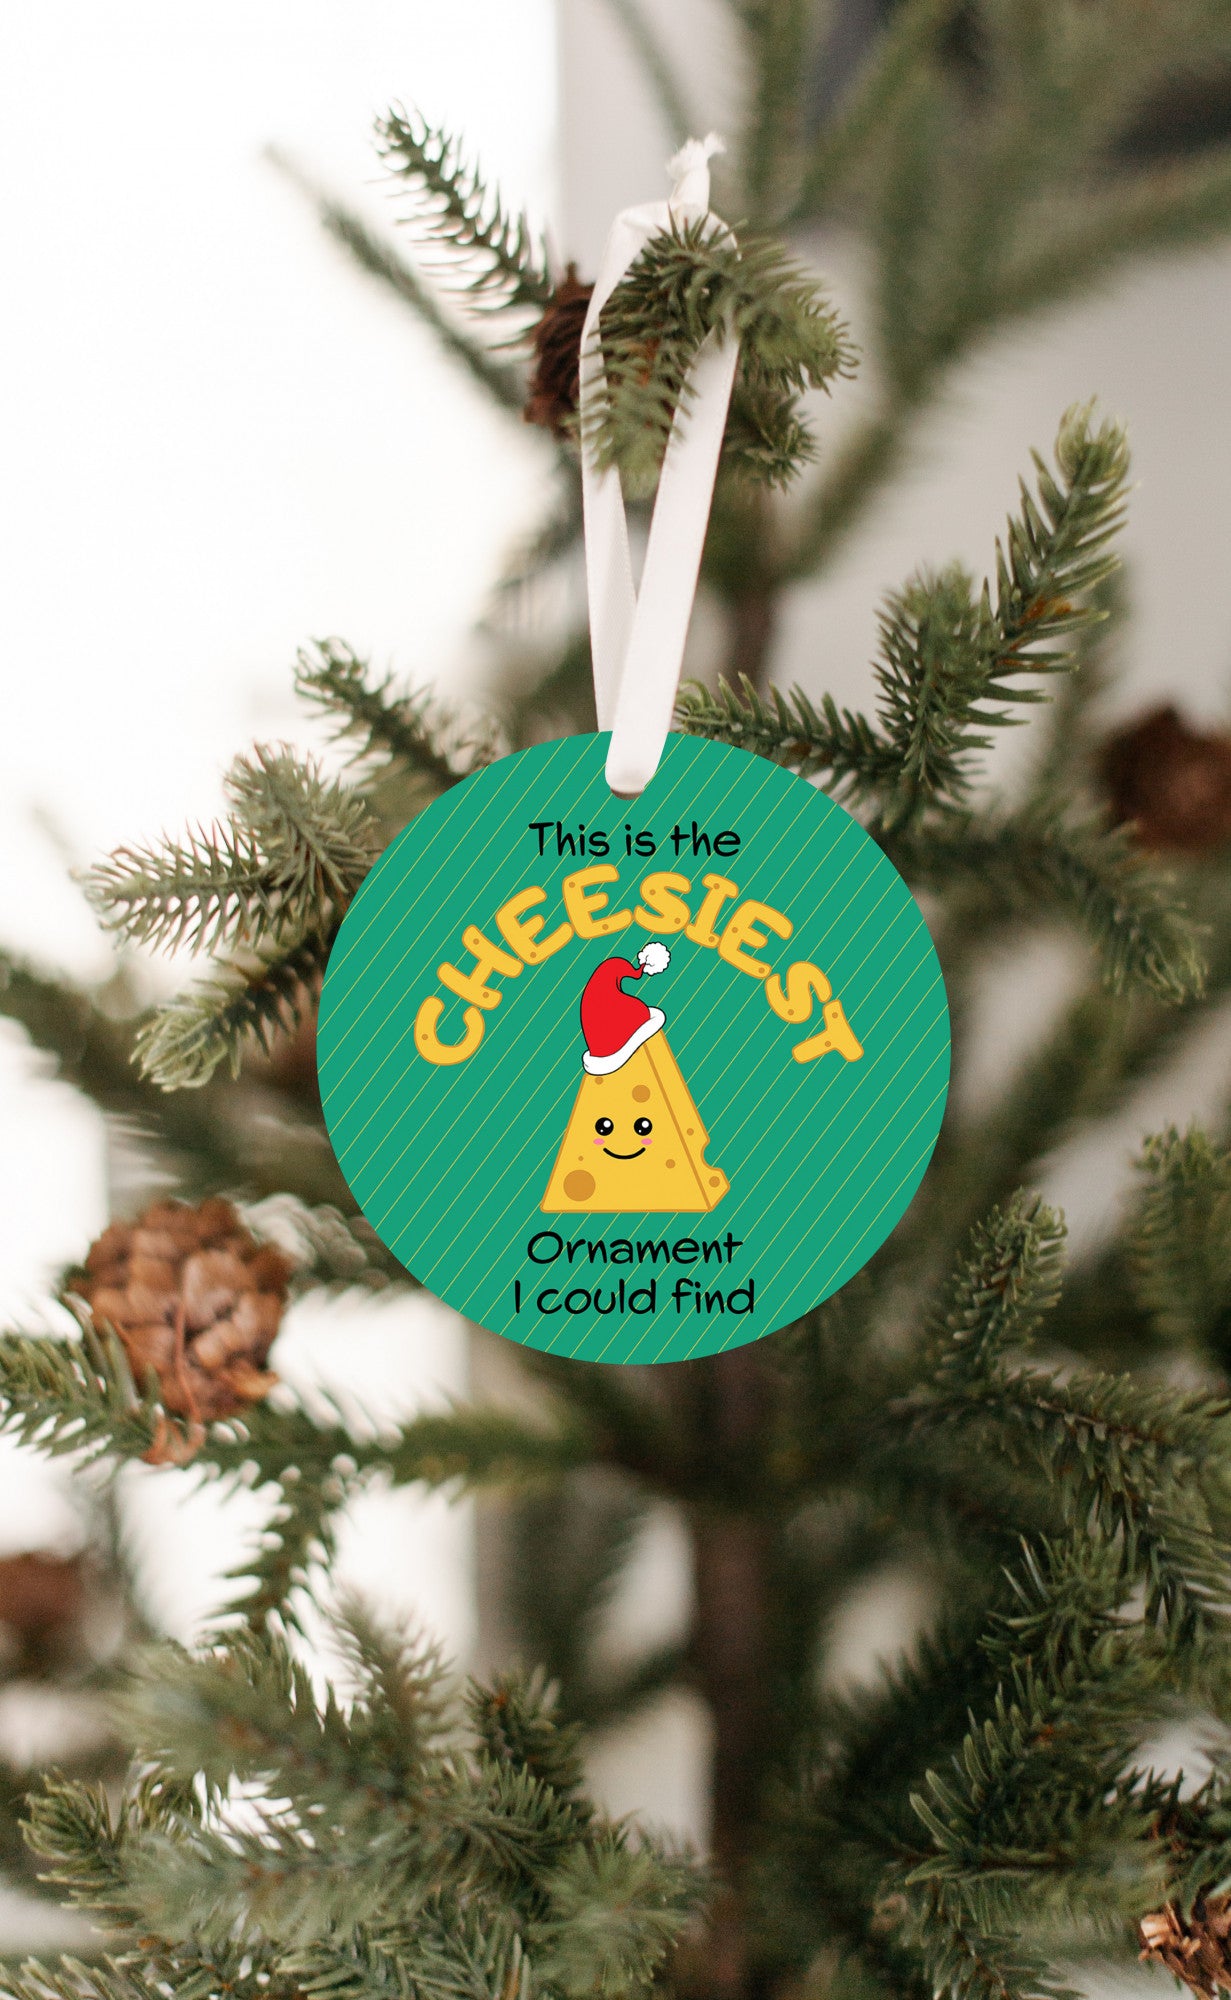 This is the Cheesiest Ornament